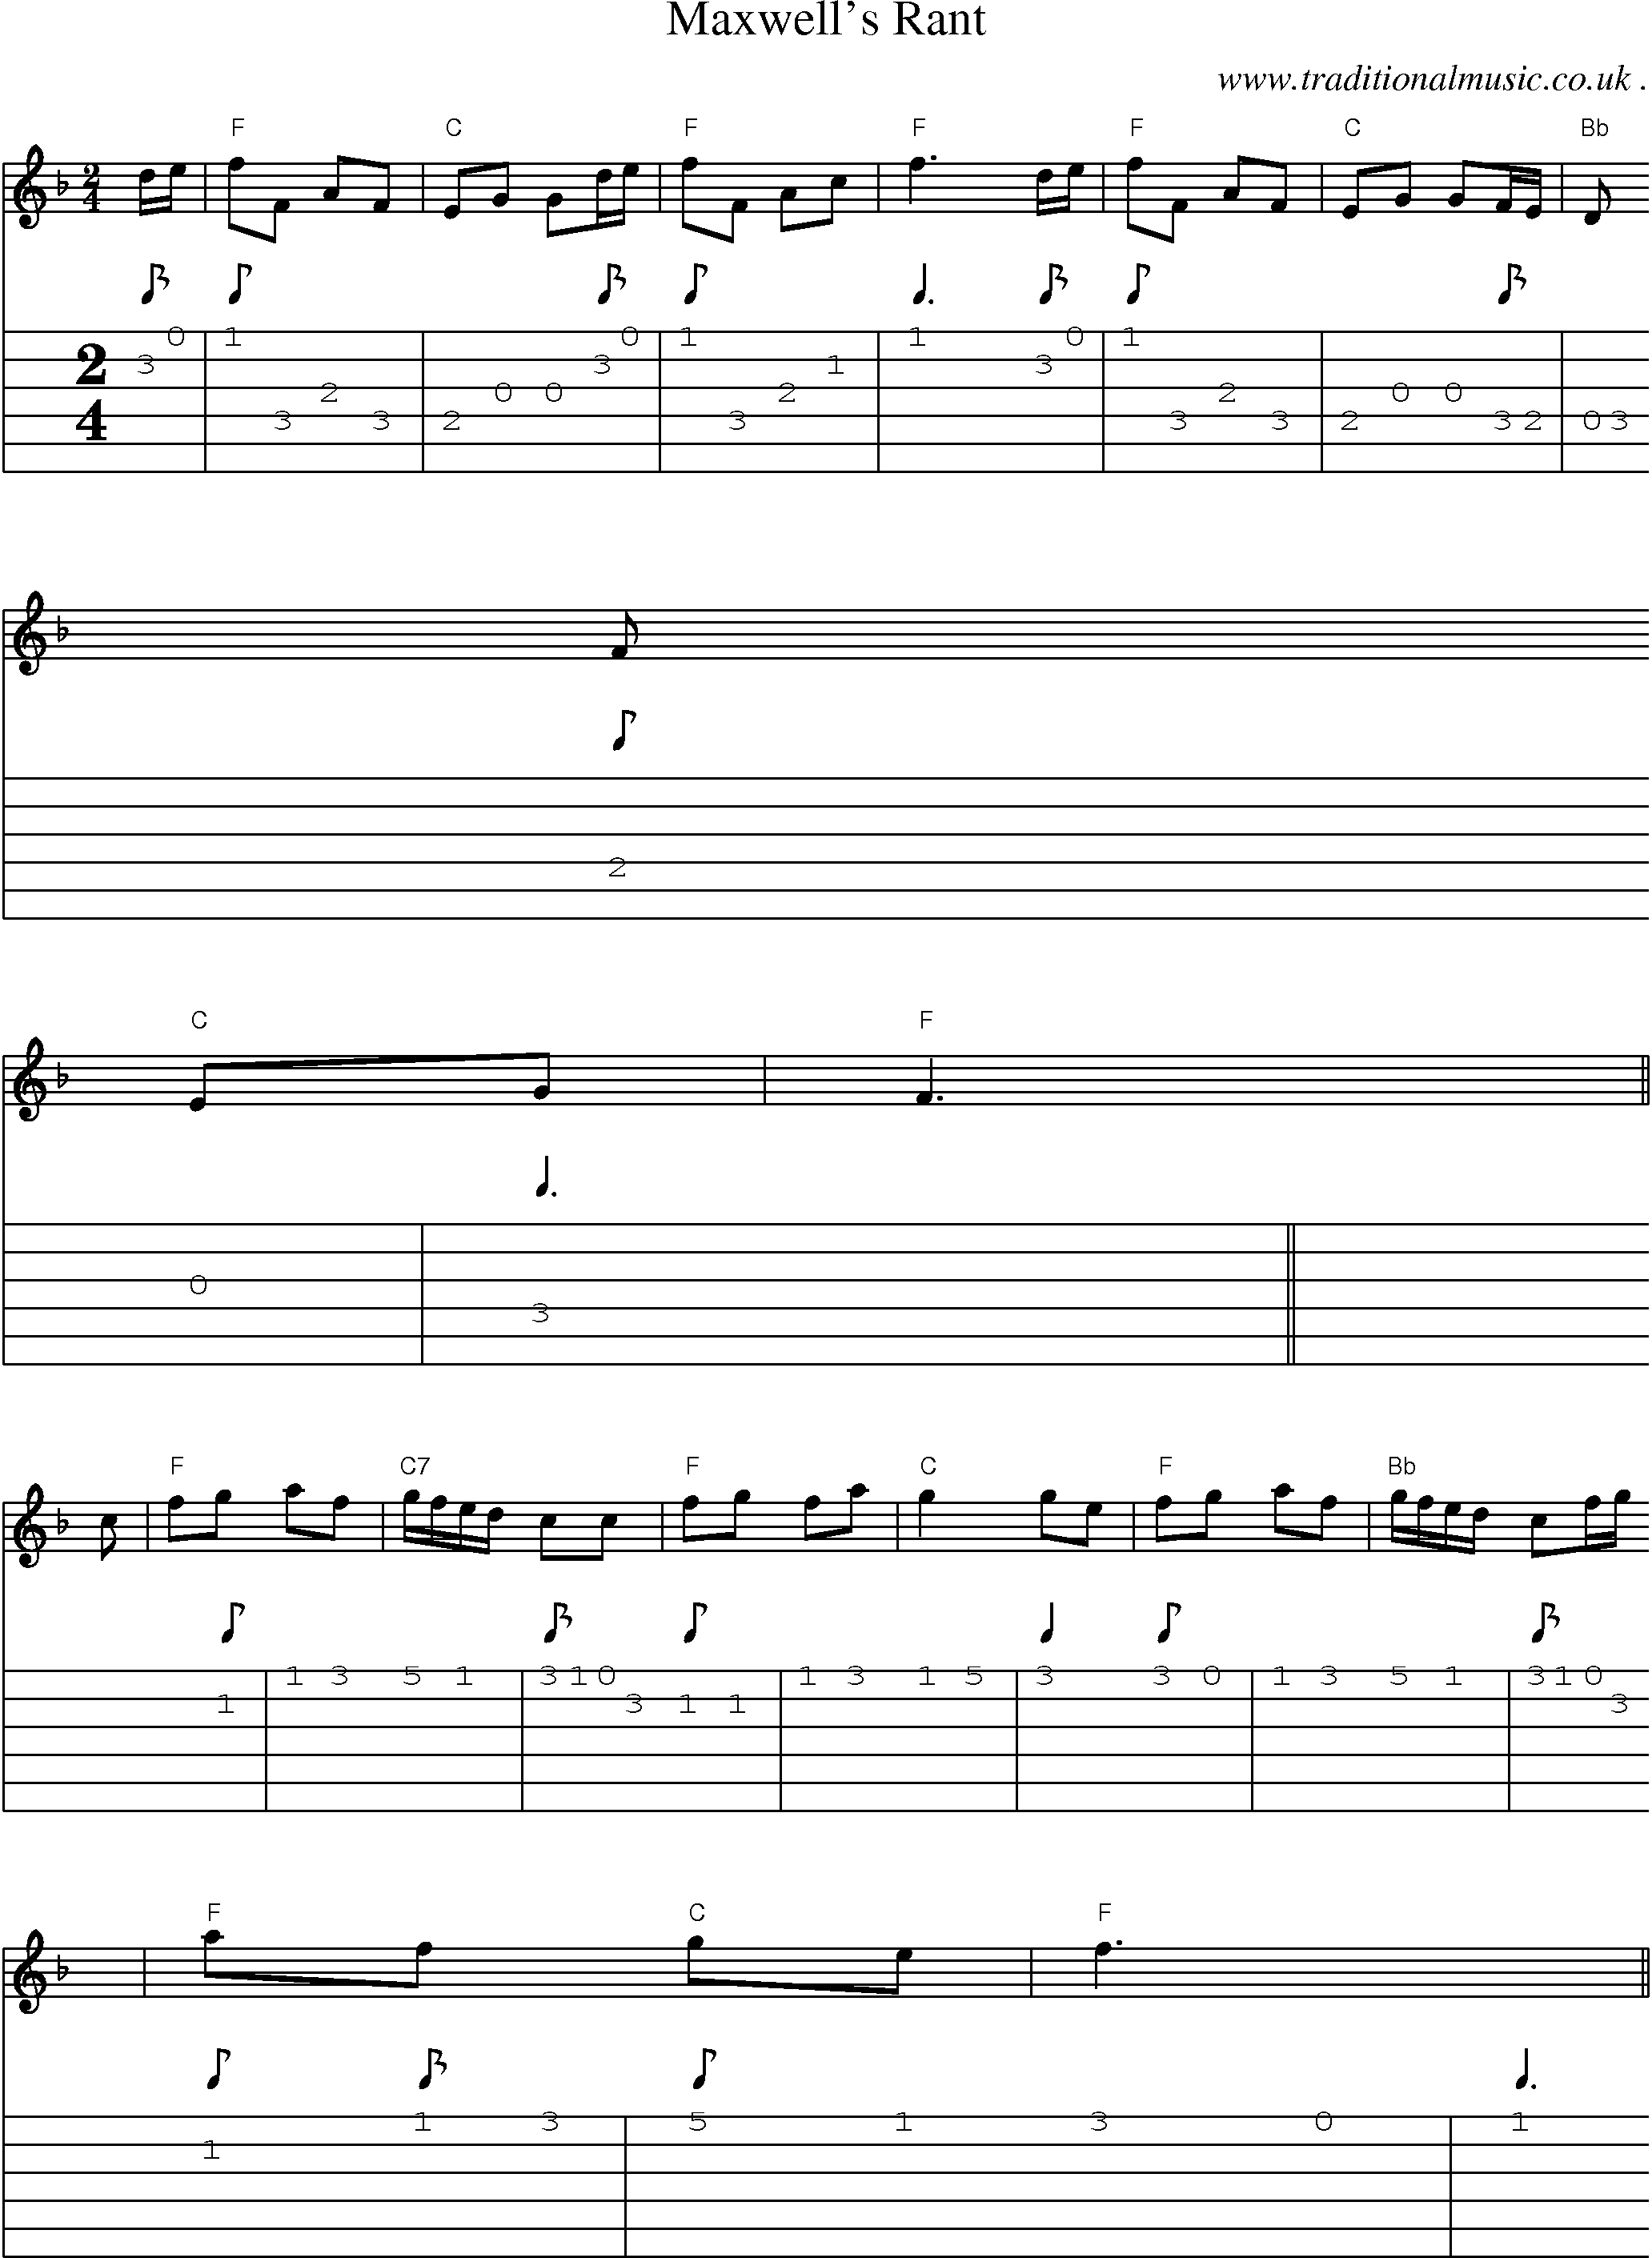 Sheet-music  score, Chords and Guitar Tabs for Maxwells Rant